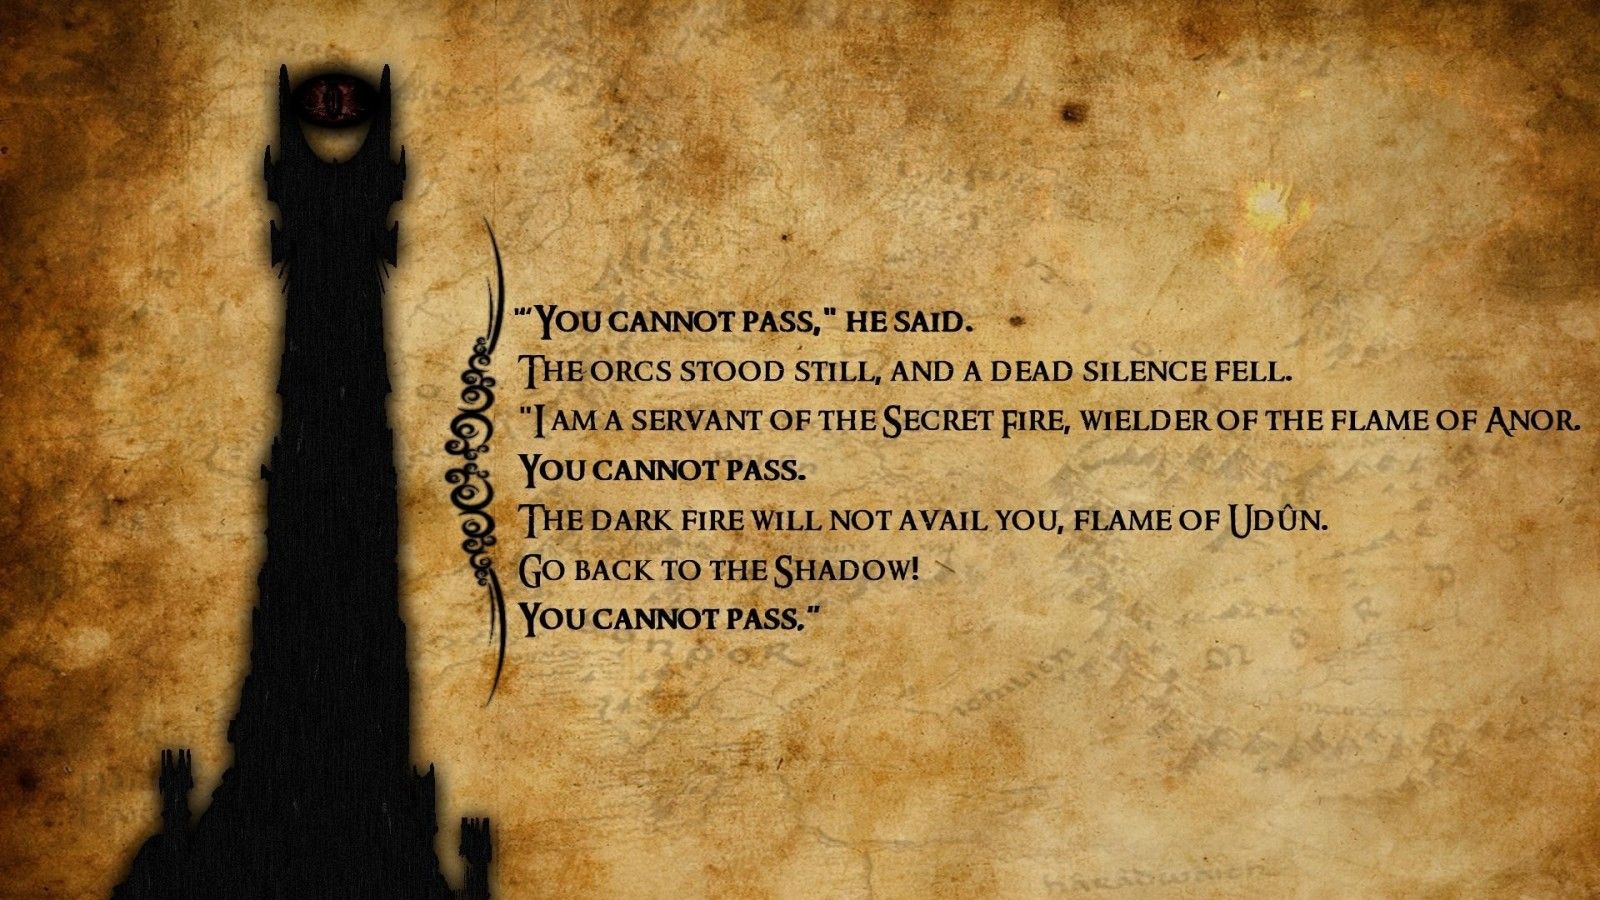 Wallpaper, The Lord of the Rings, Gandalf, quote, movies, Balrog, Barad d r, The Eye of Sauron 1920x1080